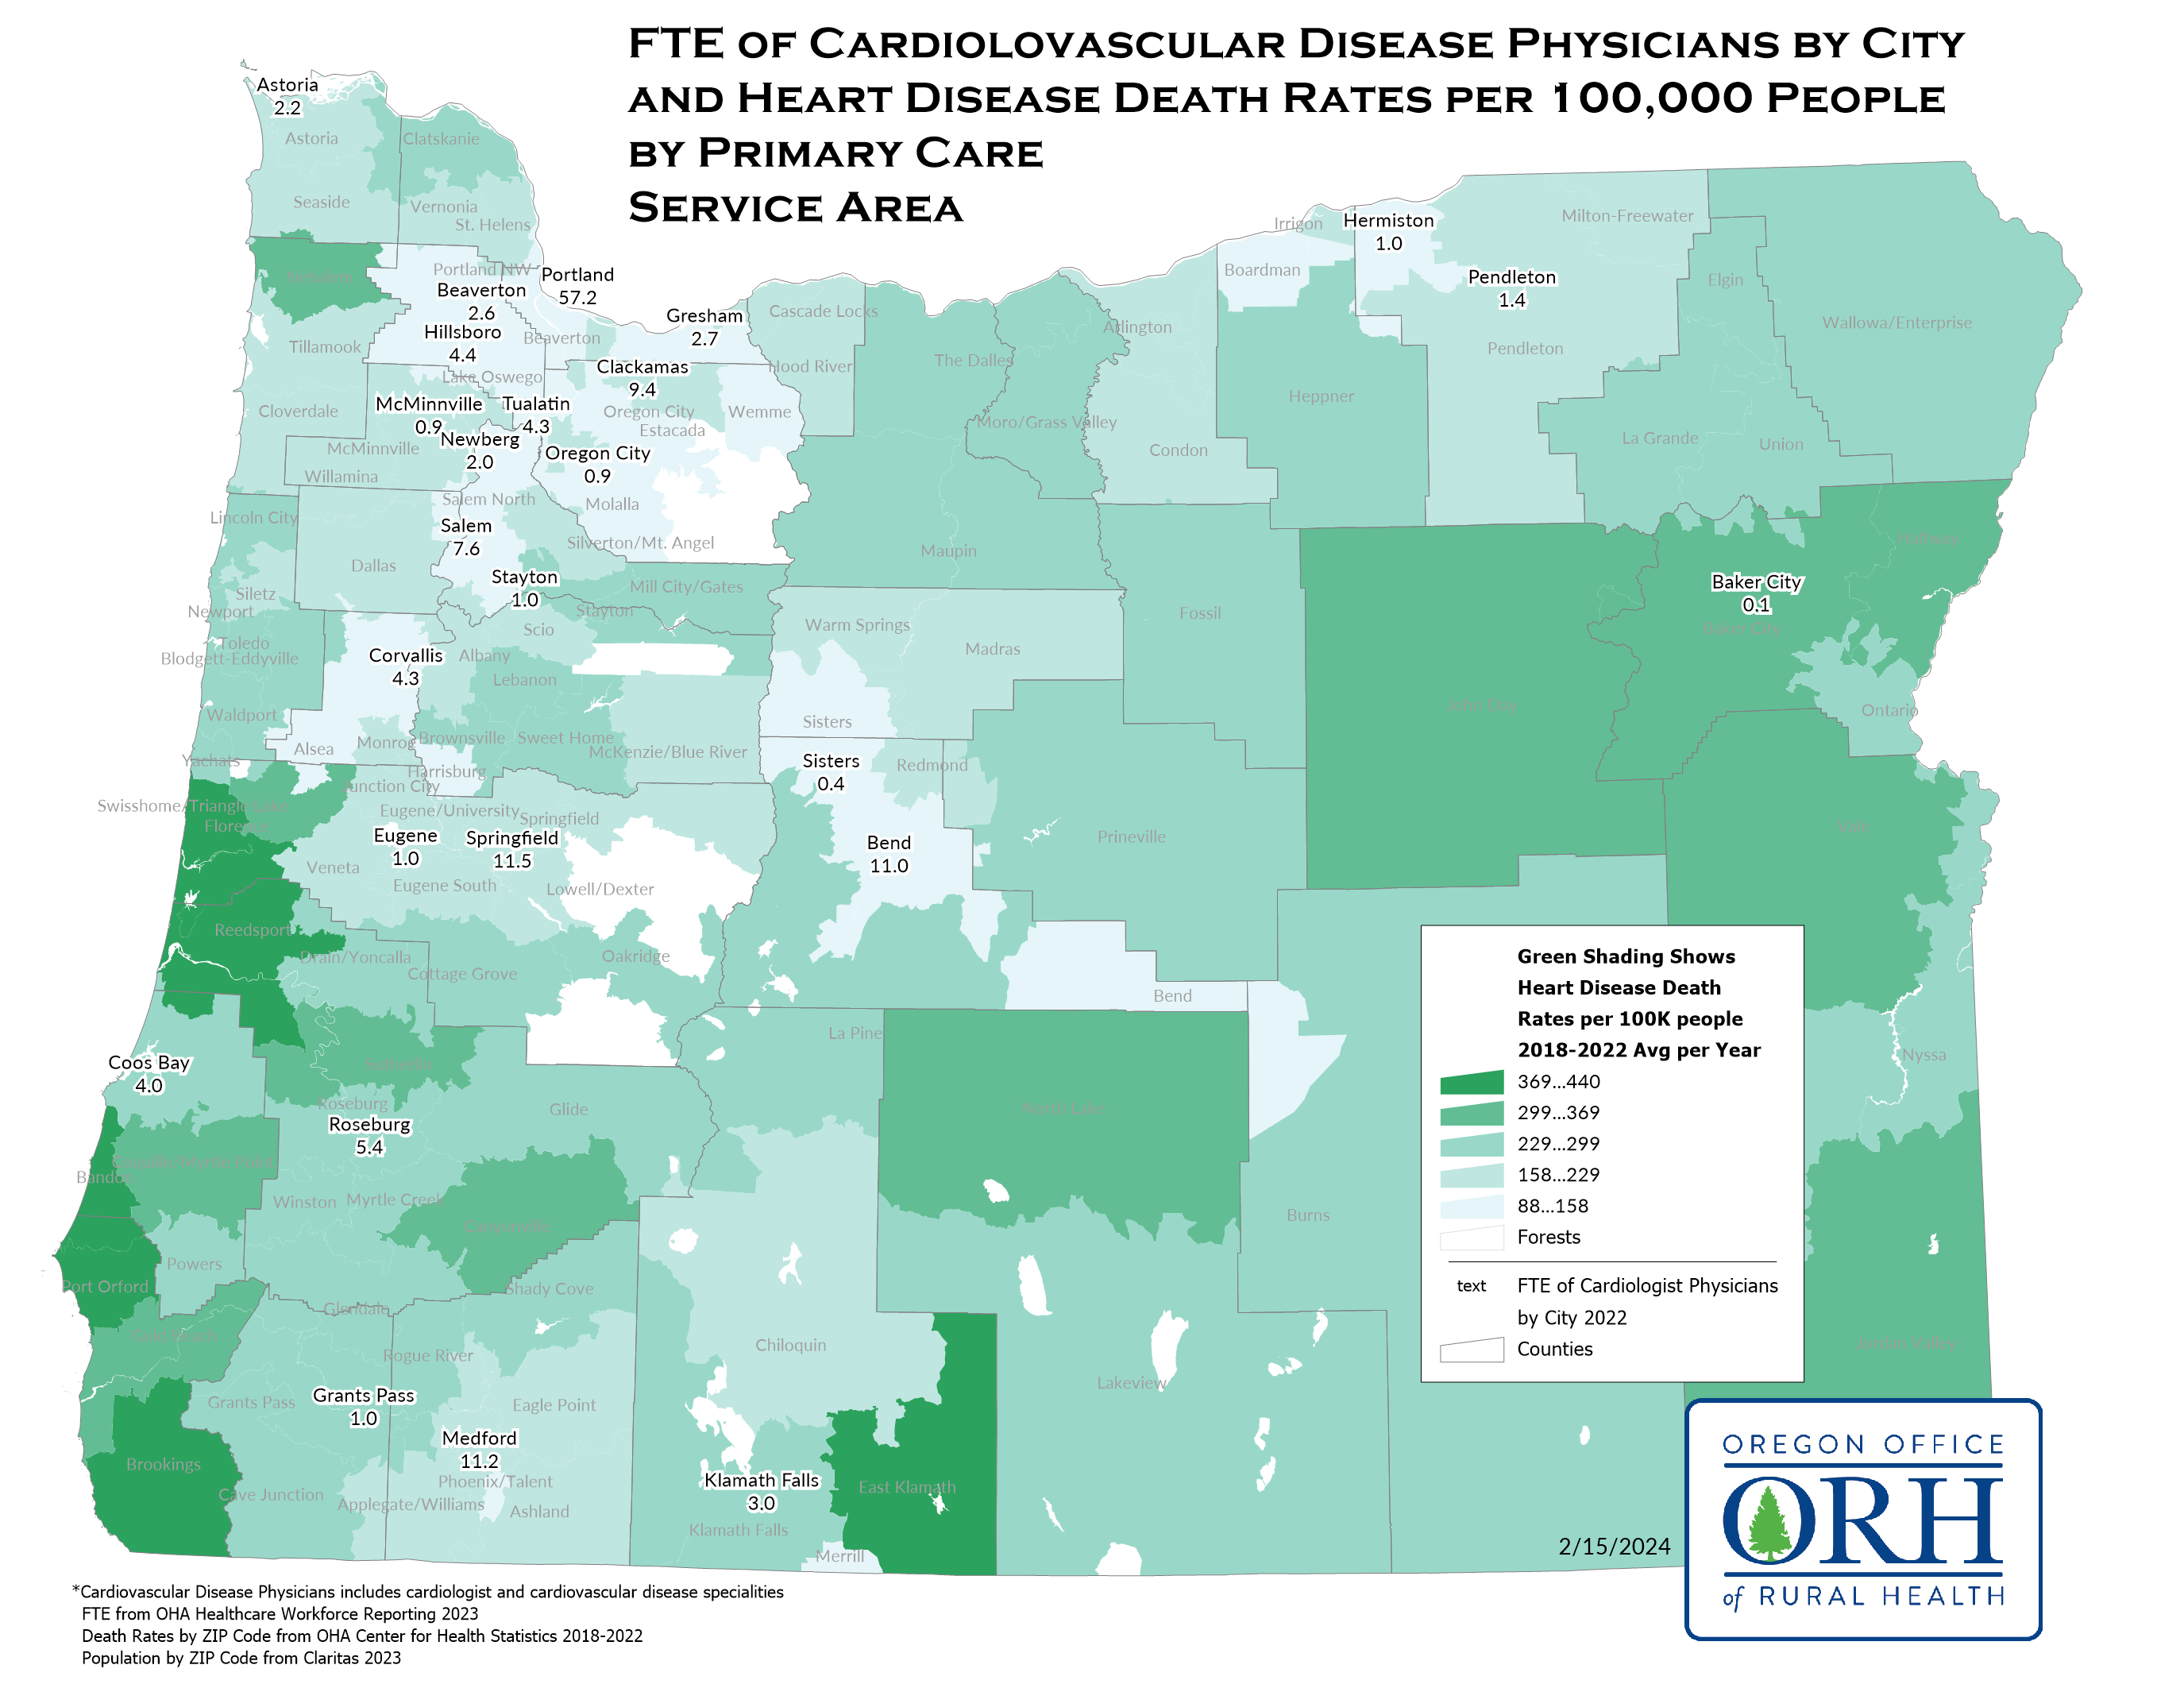 FTE of Cardiovascular Disease Physicians by City and Heart Disease Death Rates per 100,000 by Service Area